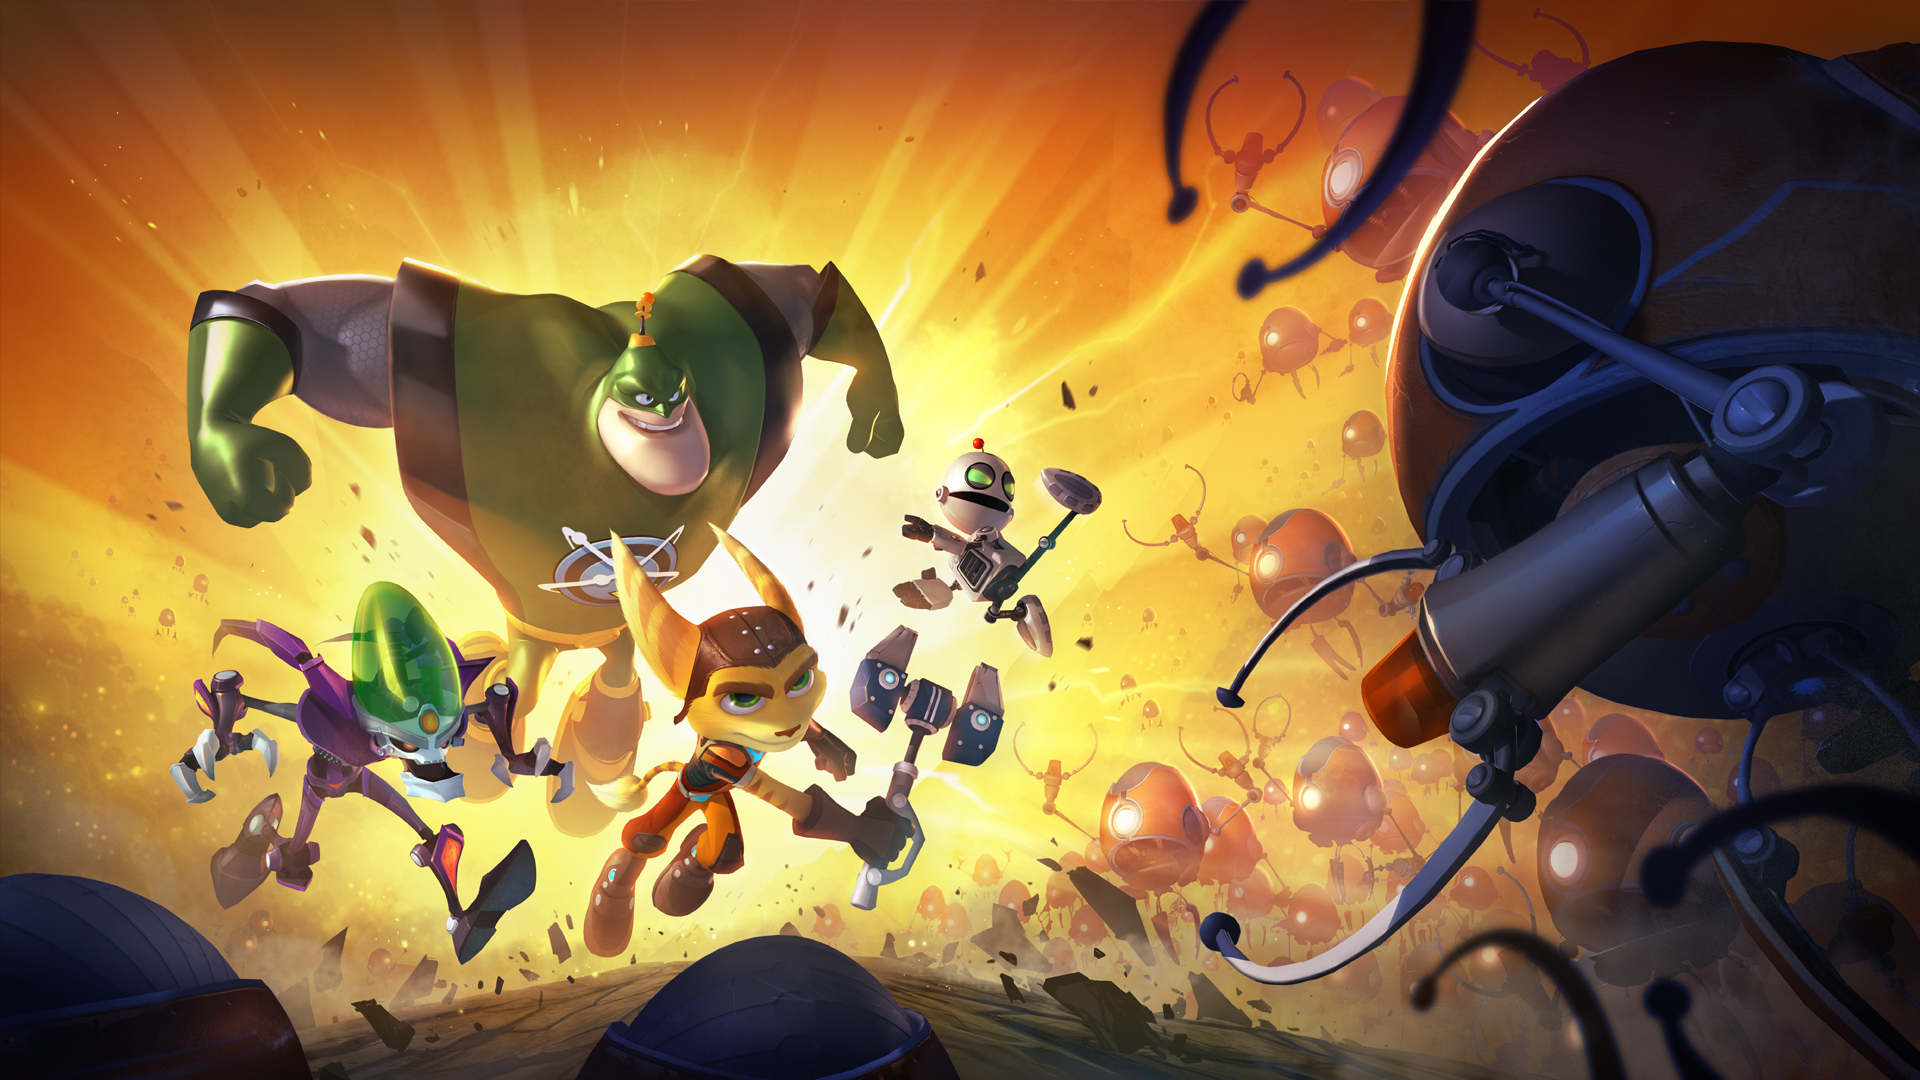 Ratchet and Clank wallpaper 1920x1080 3   hebusorg   High